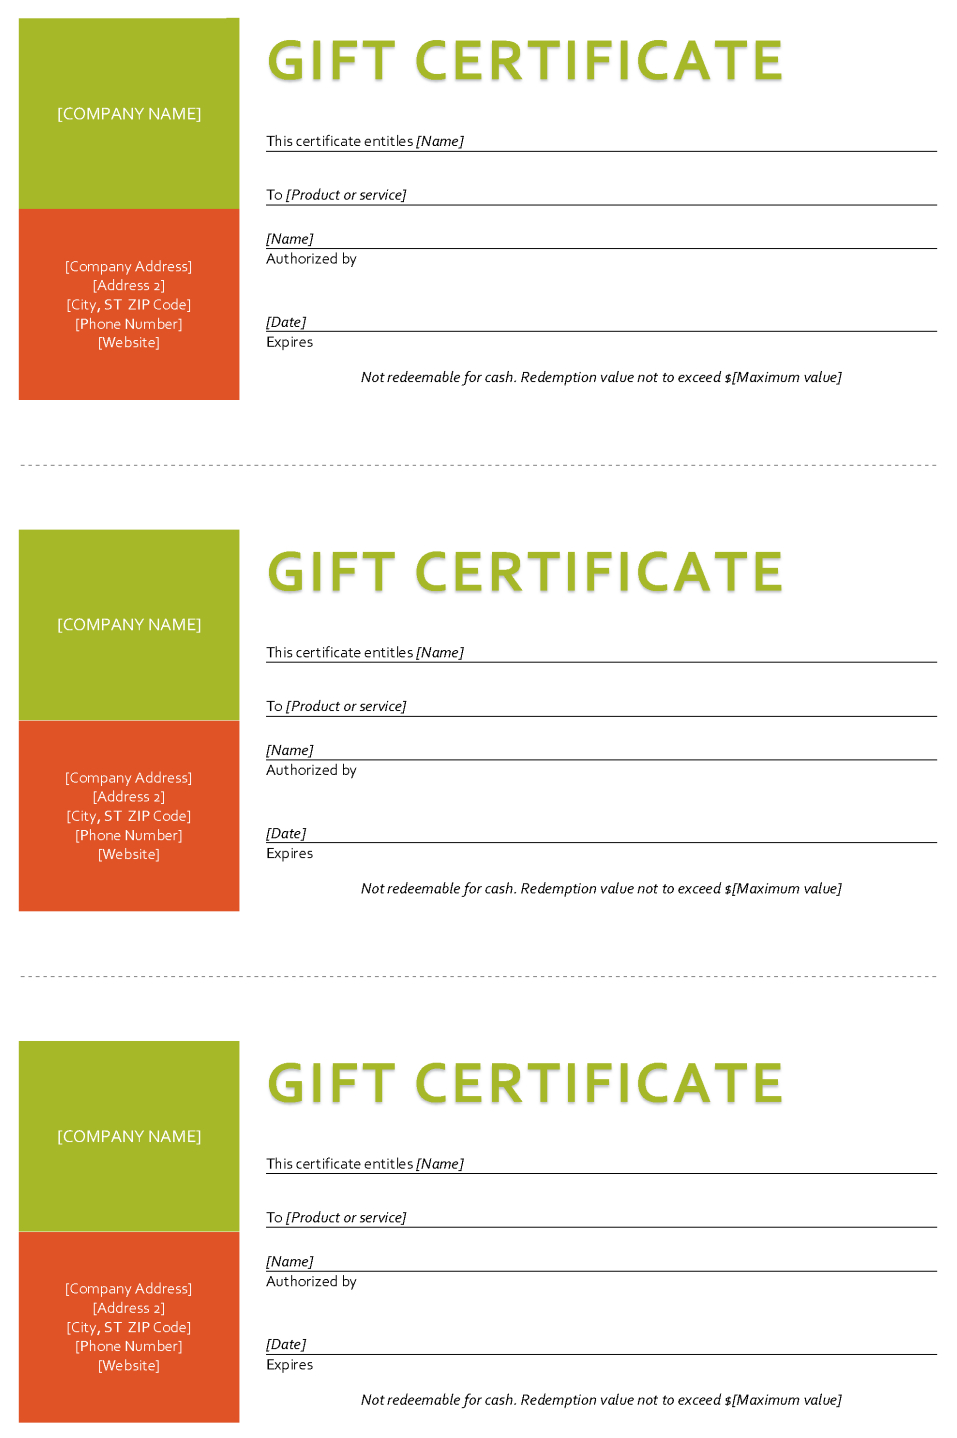 Gift Certificate Template – Sample Gift Certificate Pertaining To Company Gift Certificate Template